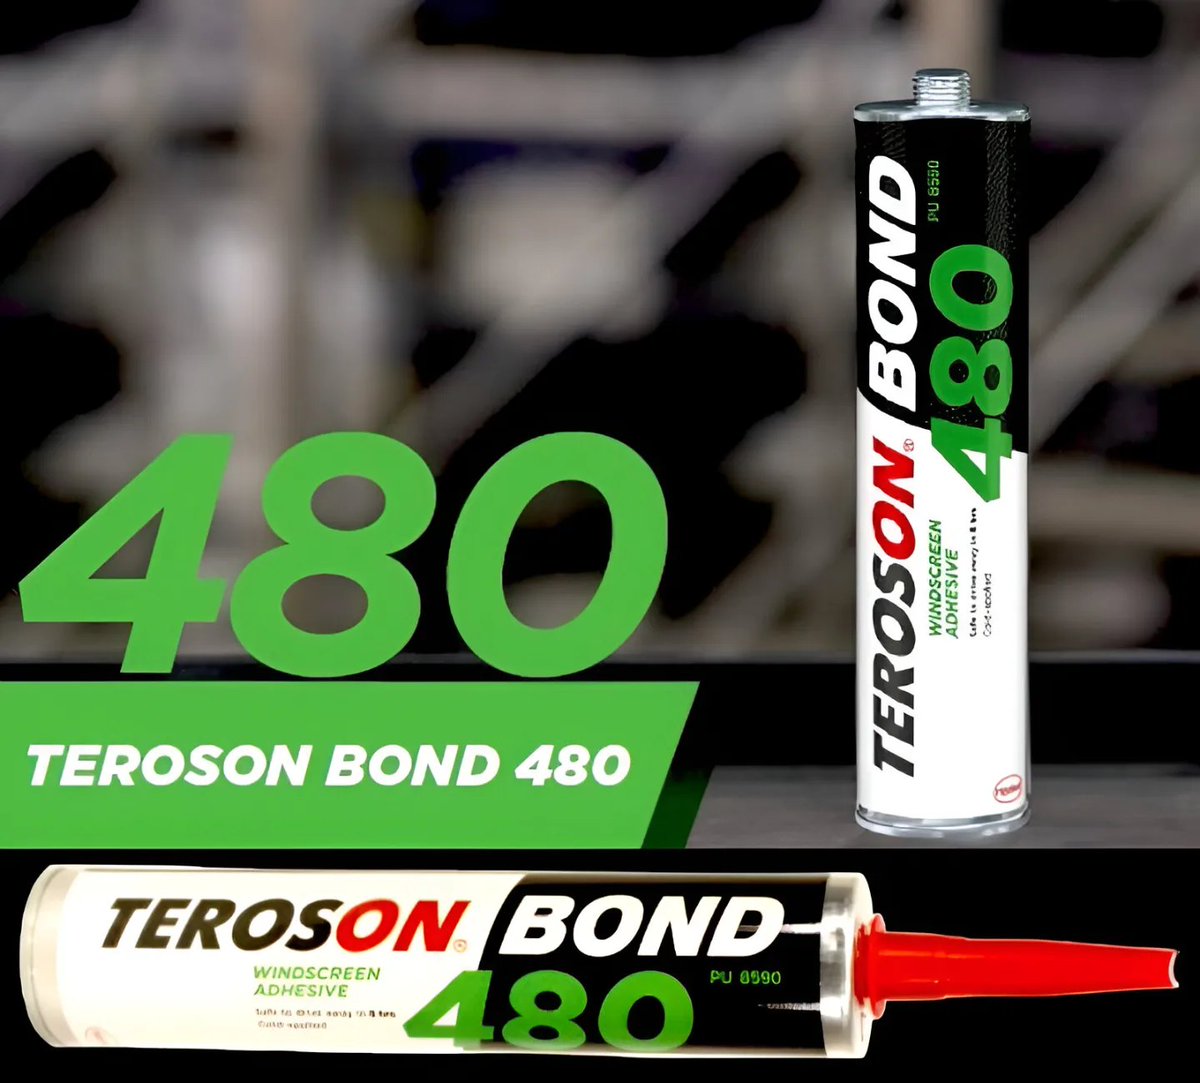 🌟 Upgrade your car's safety with Teroson 480 Windscreen Adhesive 310ml! 🌟

Ensure a secure and reliable bond for your windscreen with our top-of-the-line adhesive. Trust in Teroson's reputation for quality and durability.
#WindscreenAdhesive #CarSafety #AutoGlass #CarRepair